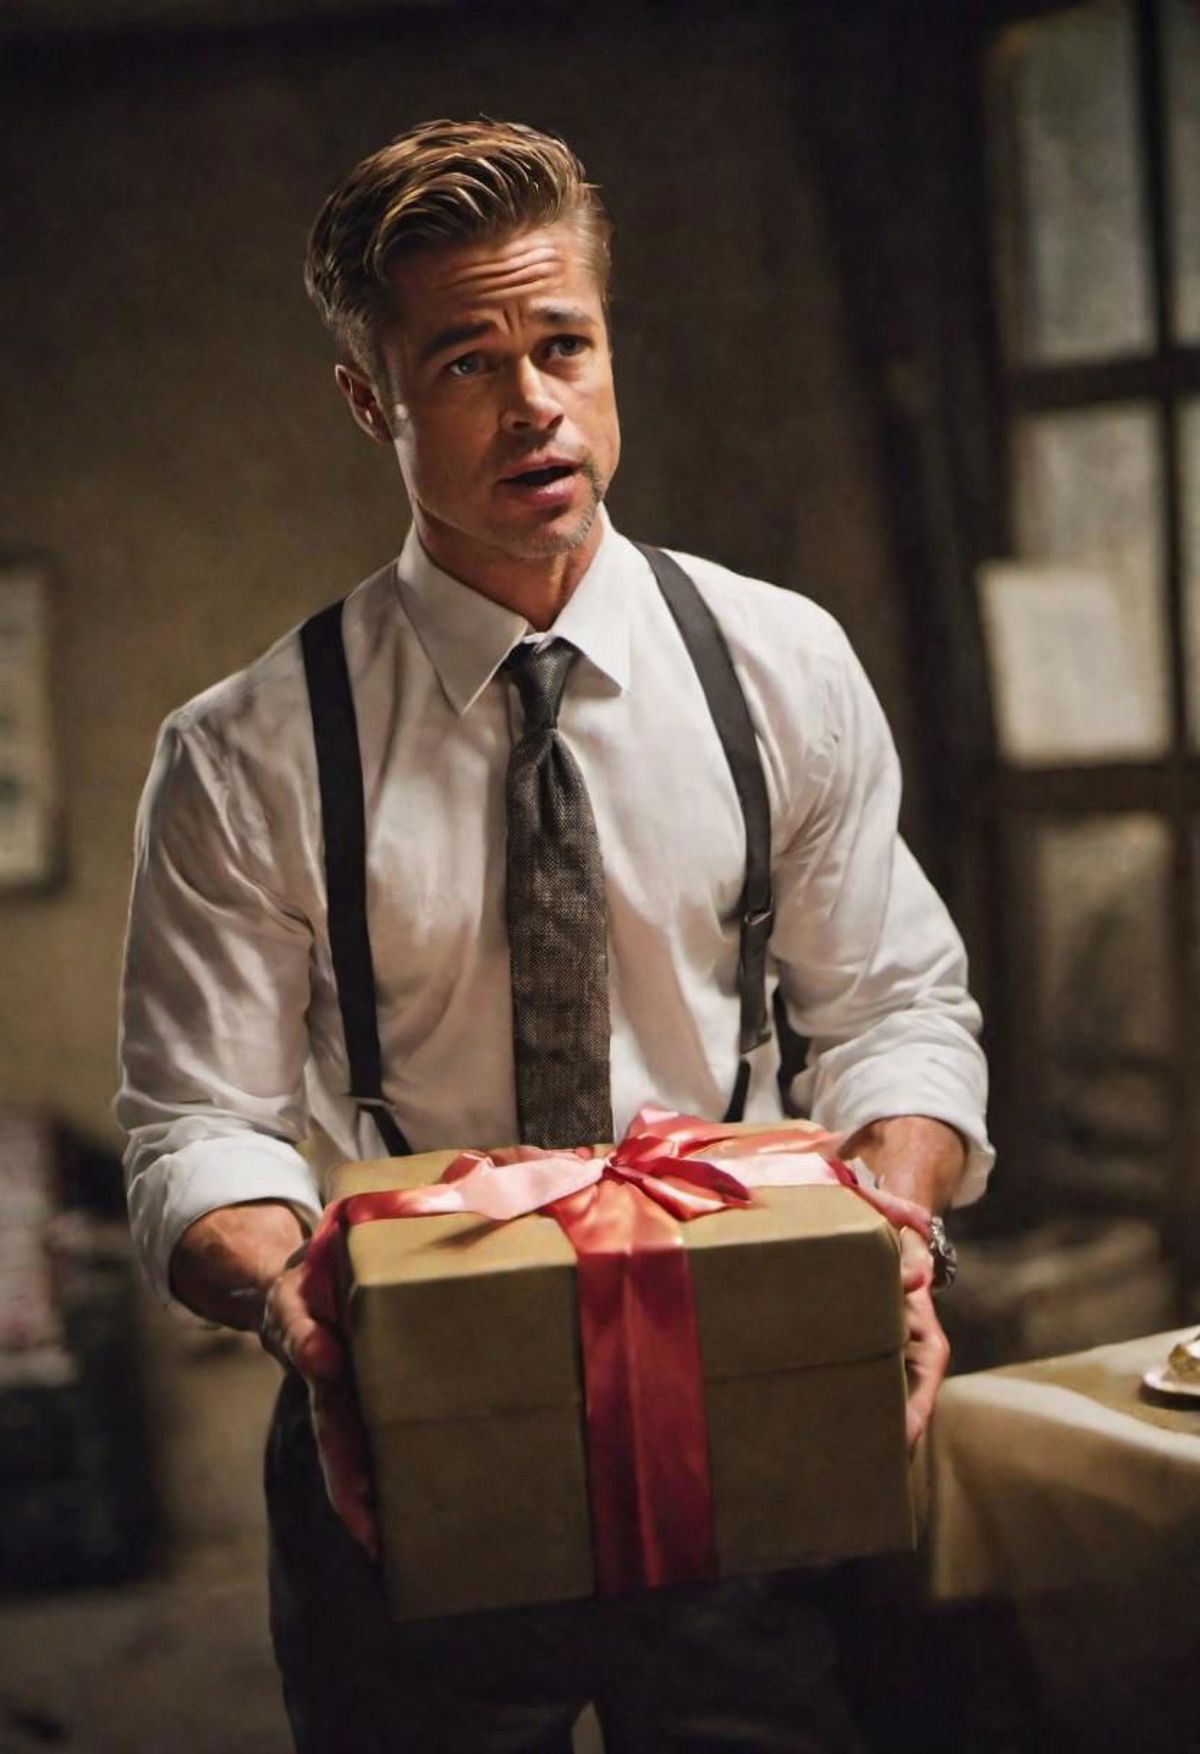 Man in a white shirt and tie holding a brown box with a red ribbon.